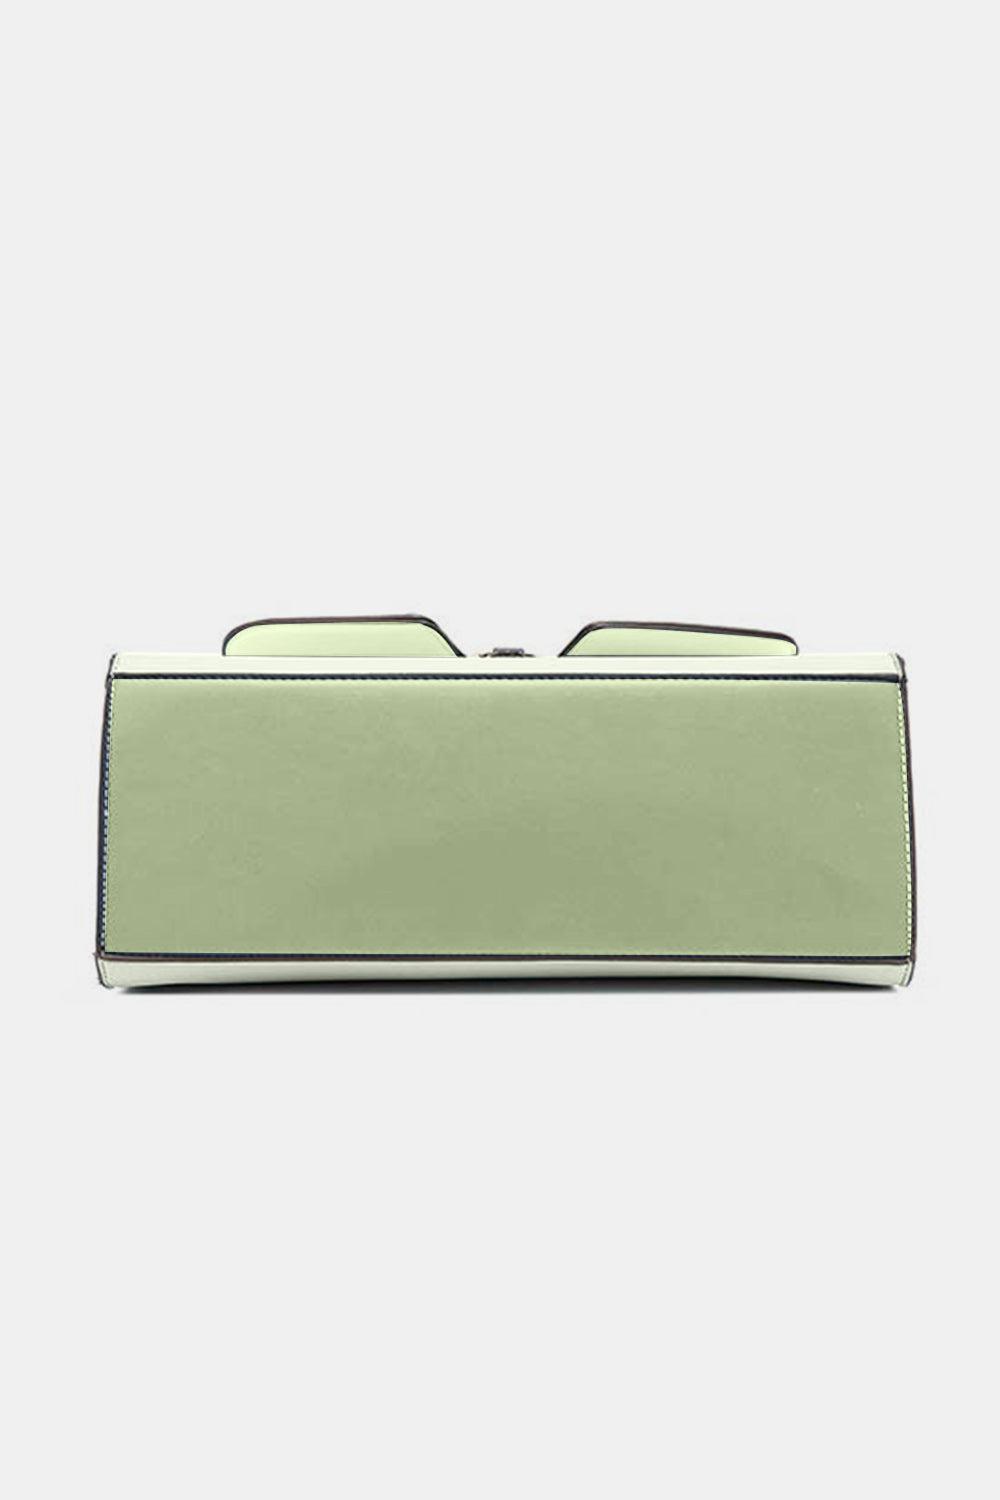 a pair of glasses sitting on top of a green case